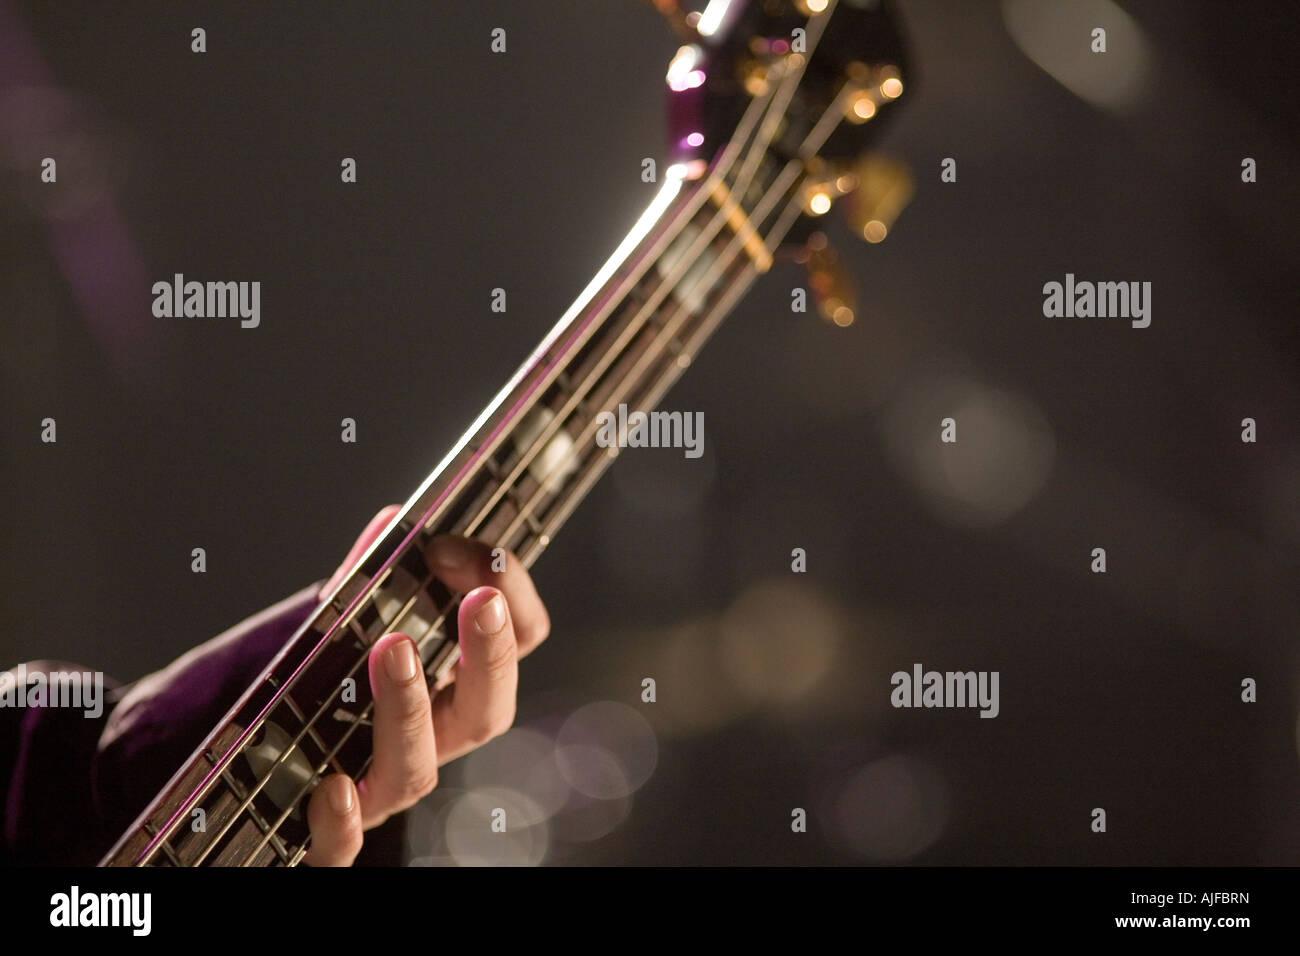 Young man playing bass guitar on stage Stock Photo